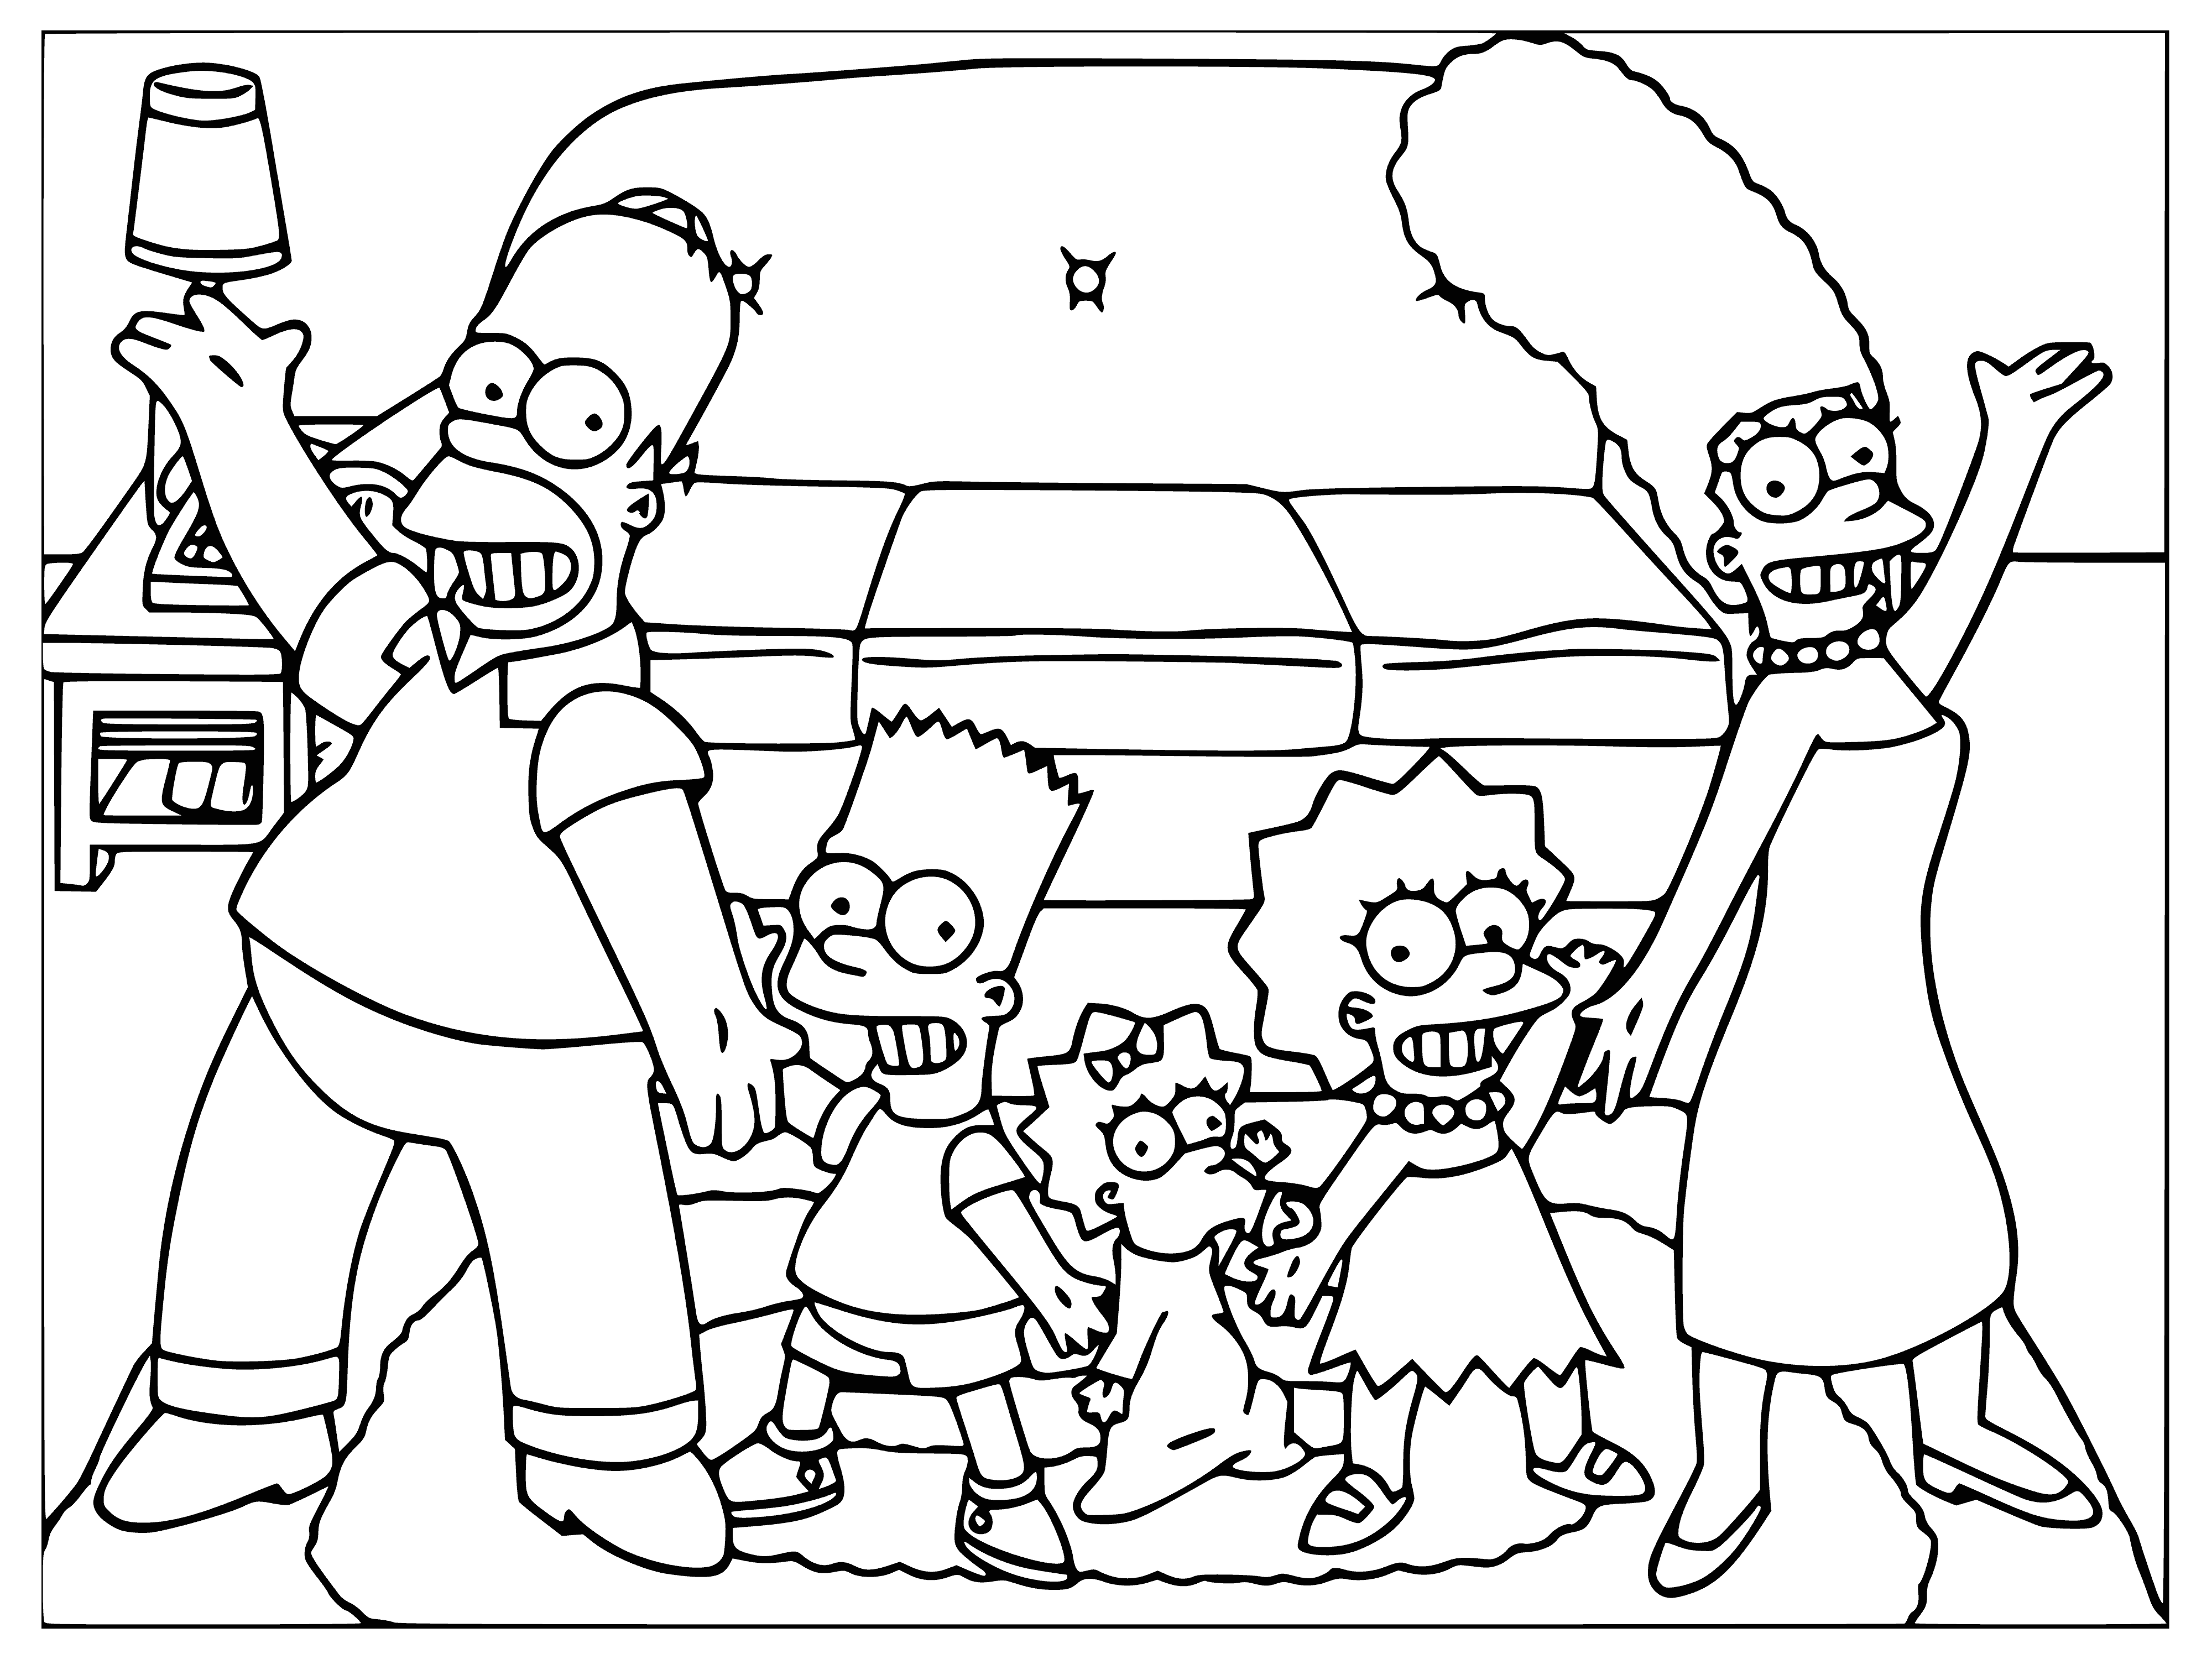 Simpsons family coloring page